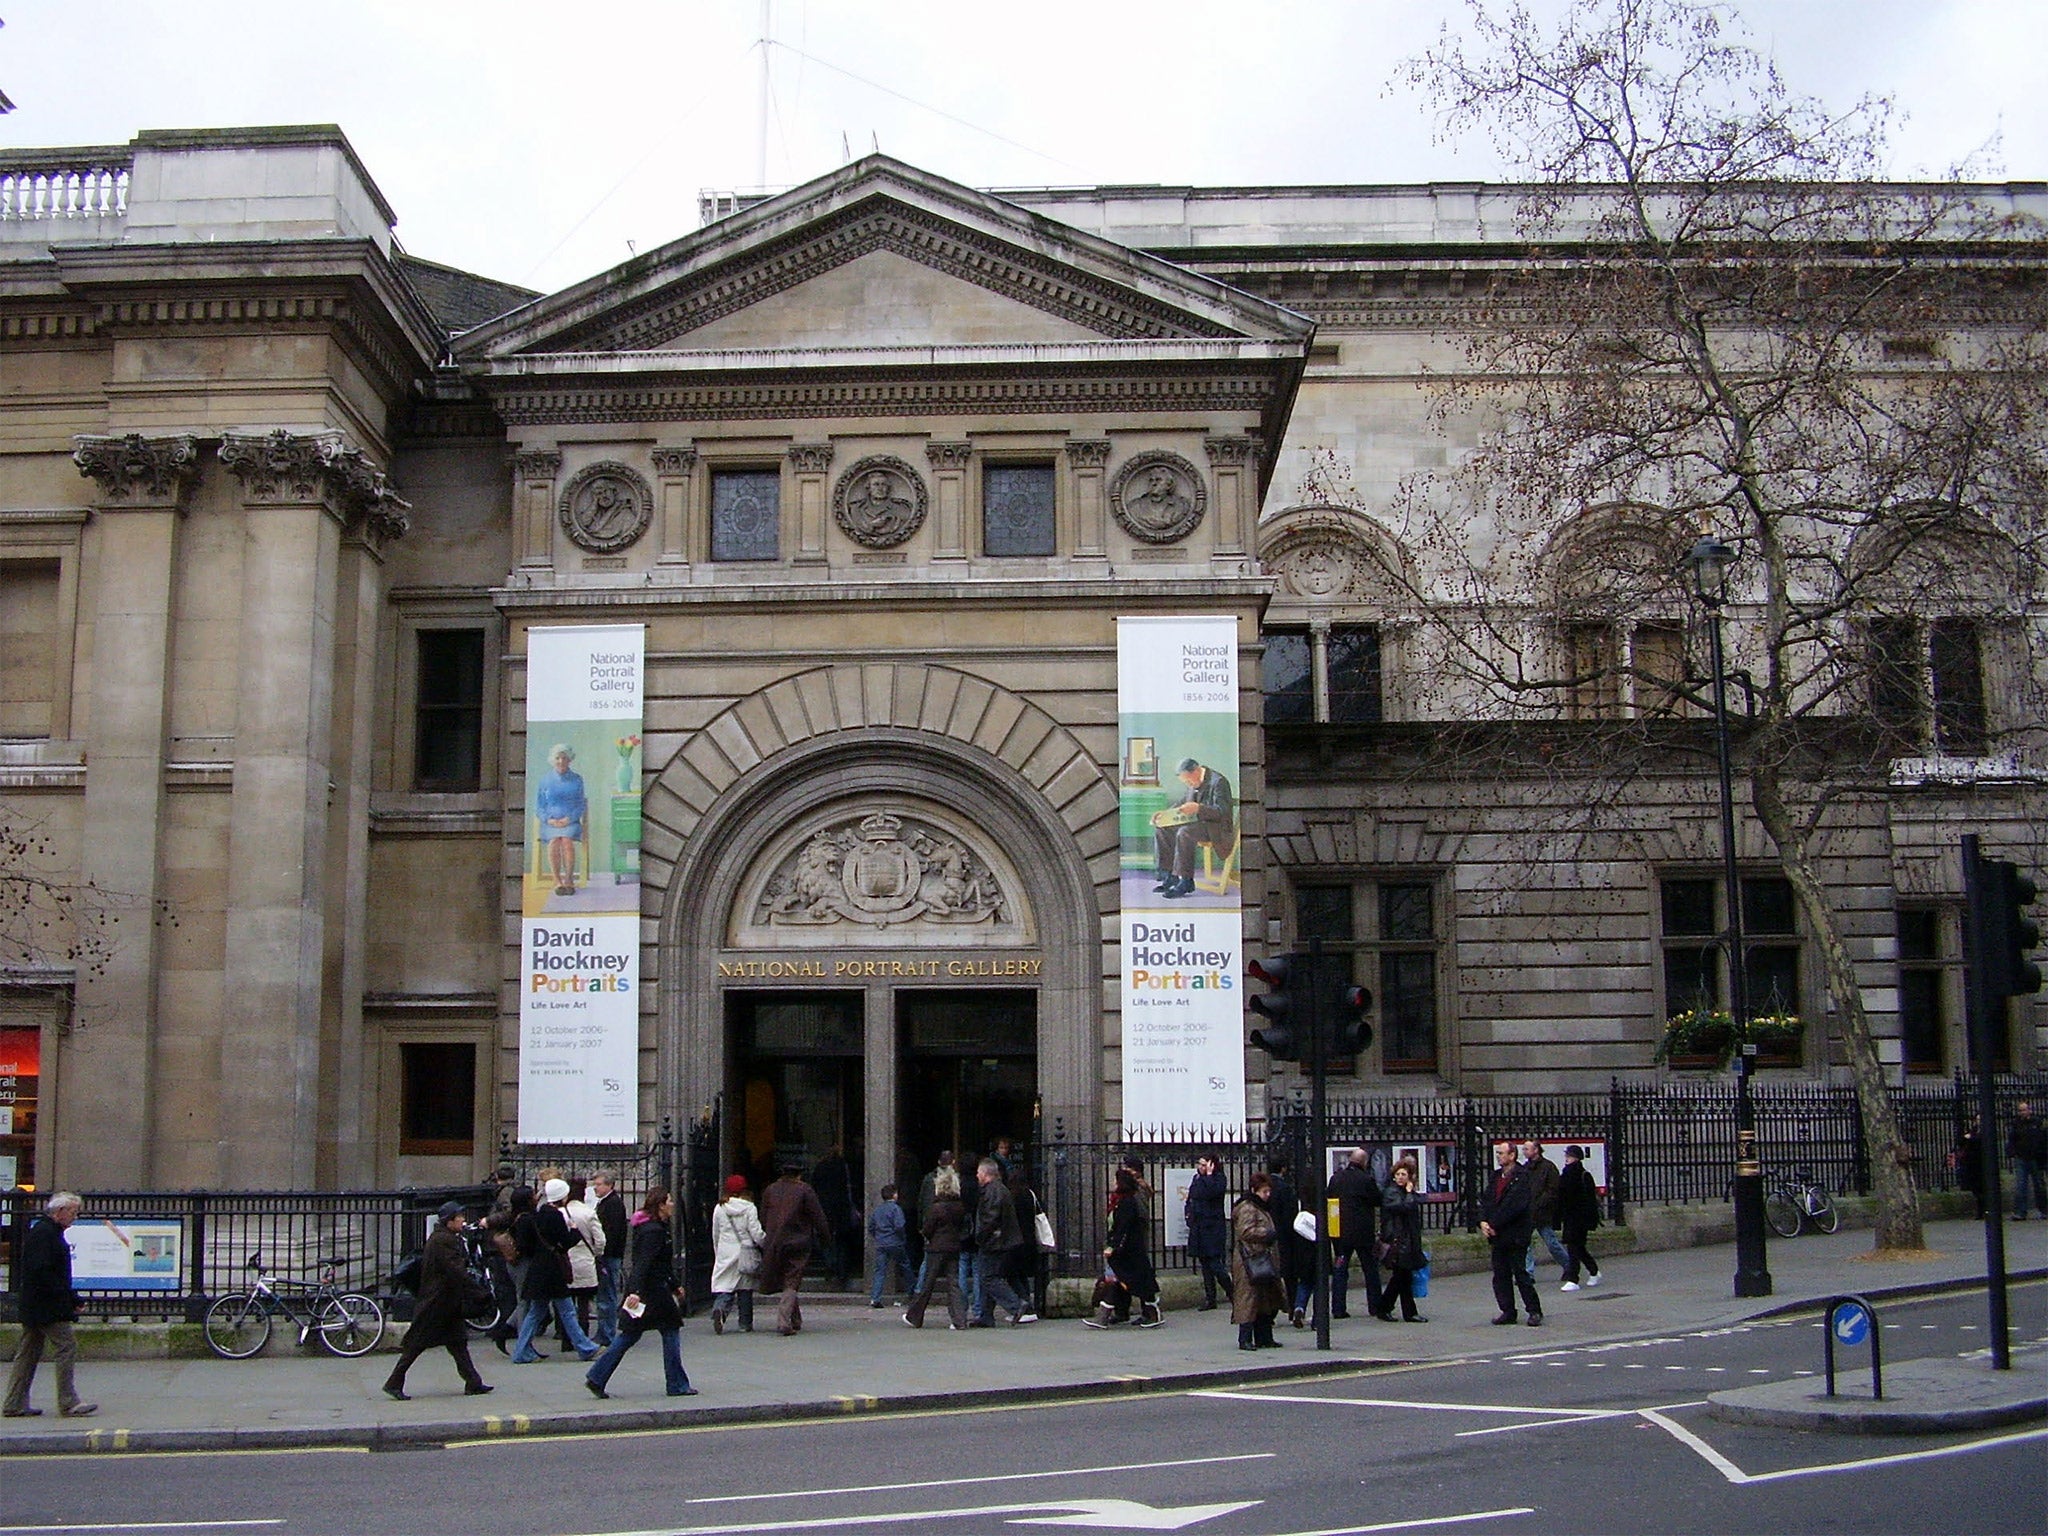 The National Portrait Gallery in London